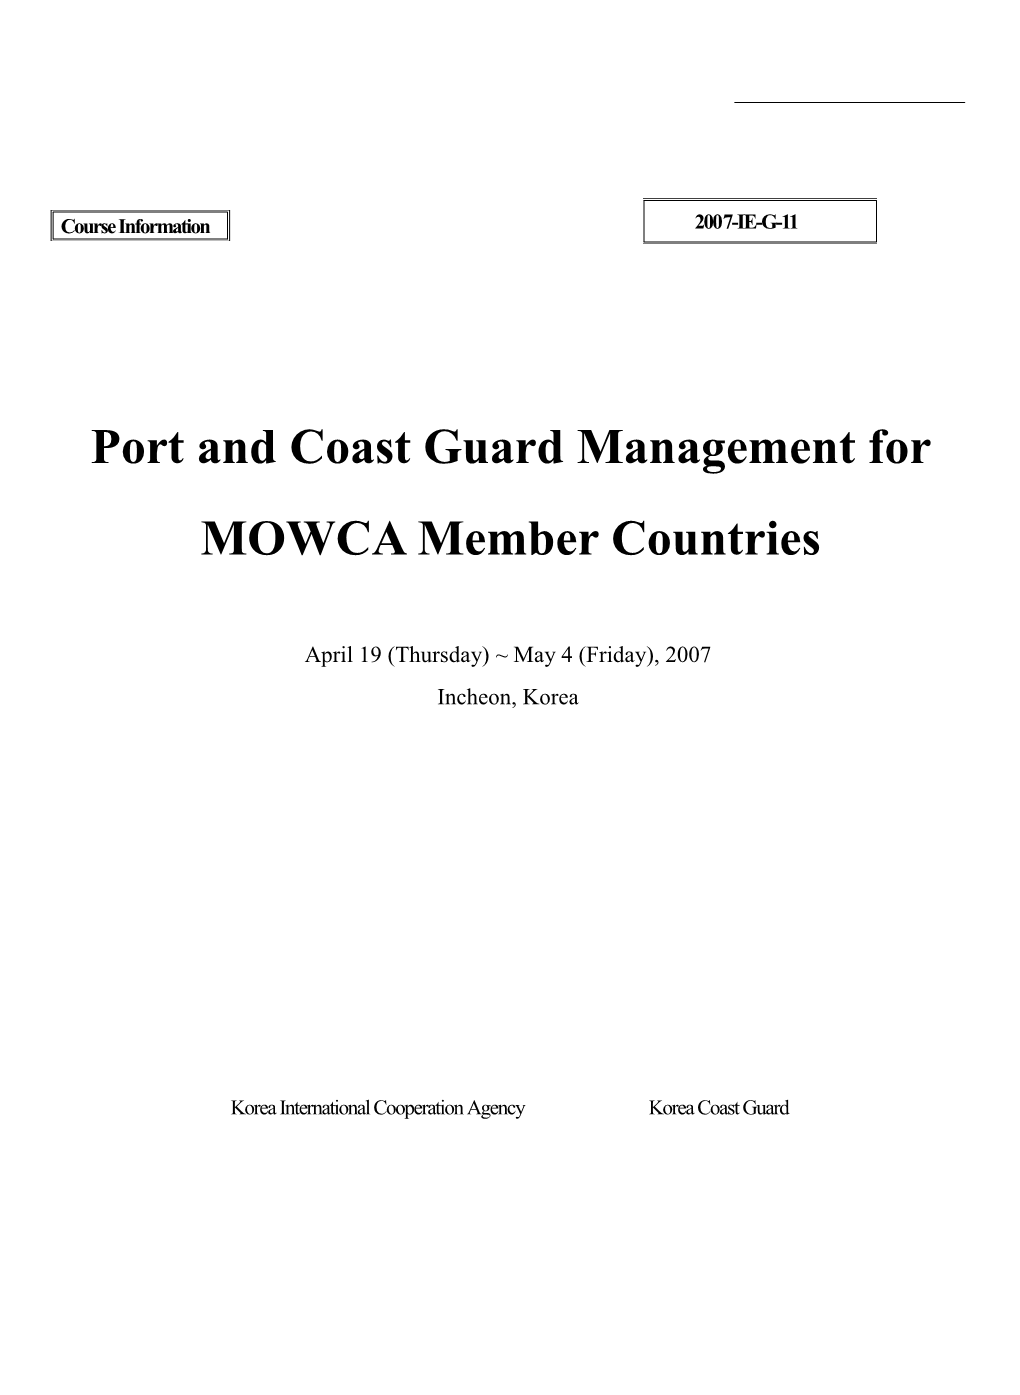 Port and Coast Guard Management for MOWCA Member Countries